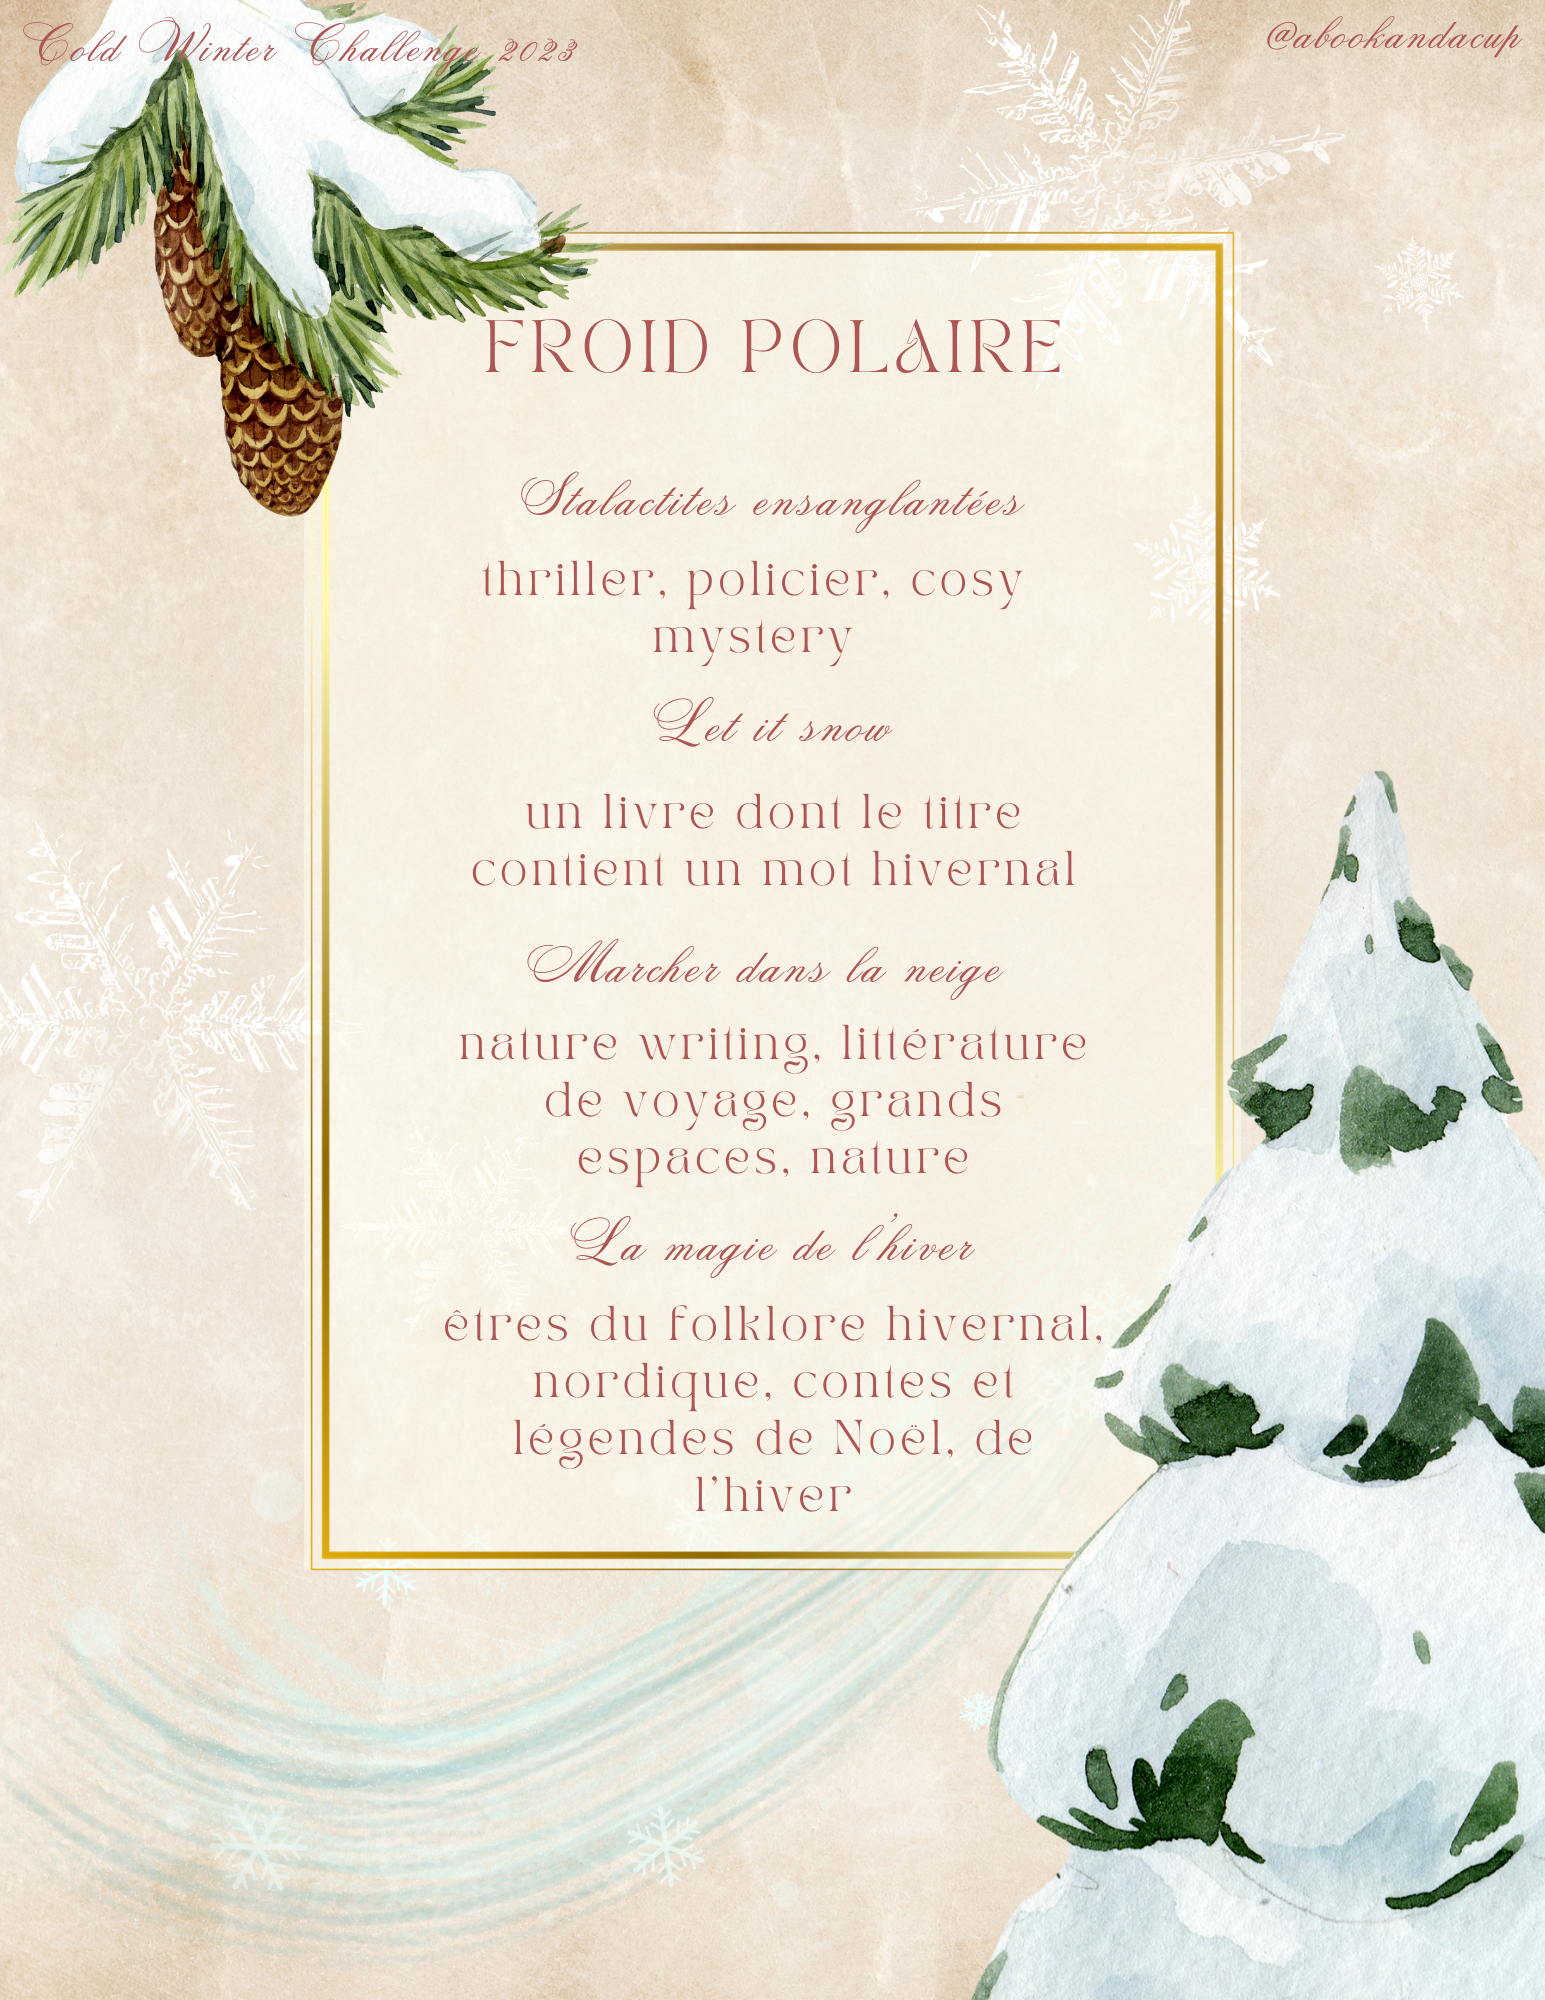 Cold Winter Challenge 2023 - Froid polaire